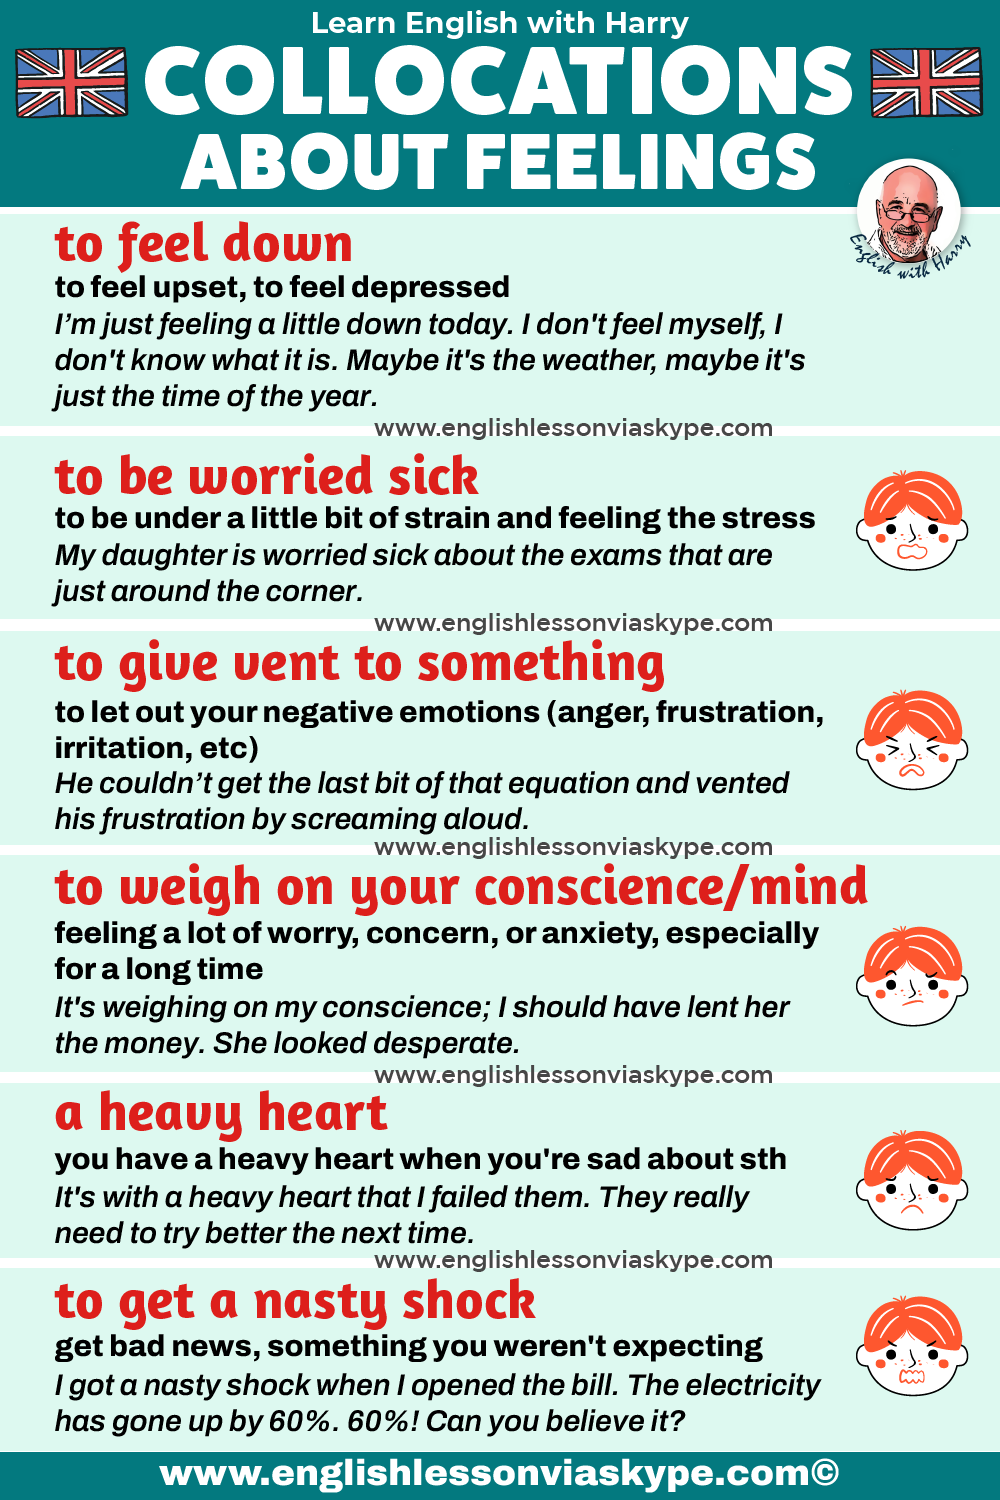 C1 English collocations and emotions. Negative feelings. Expressions for FCE, CAE, IELTS. Online English lessons at www.englishlessonviaskype.com #learnenglish